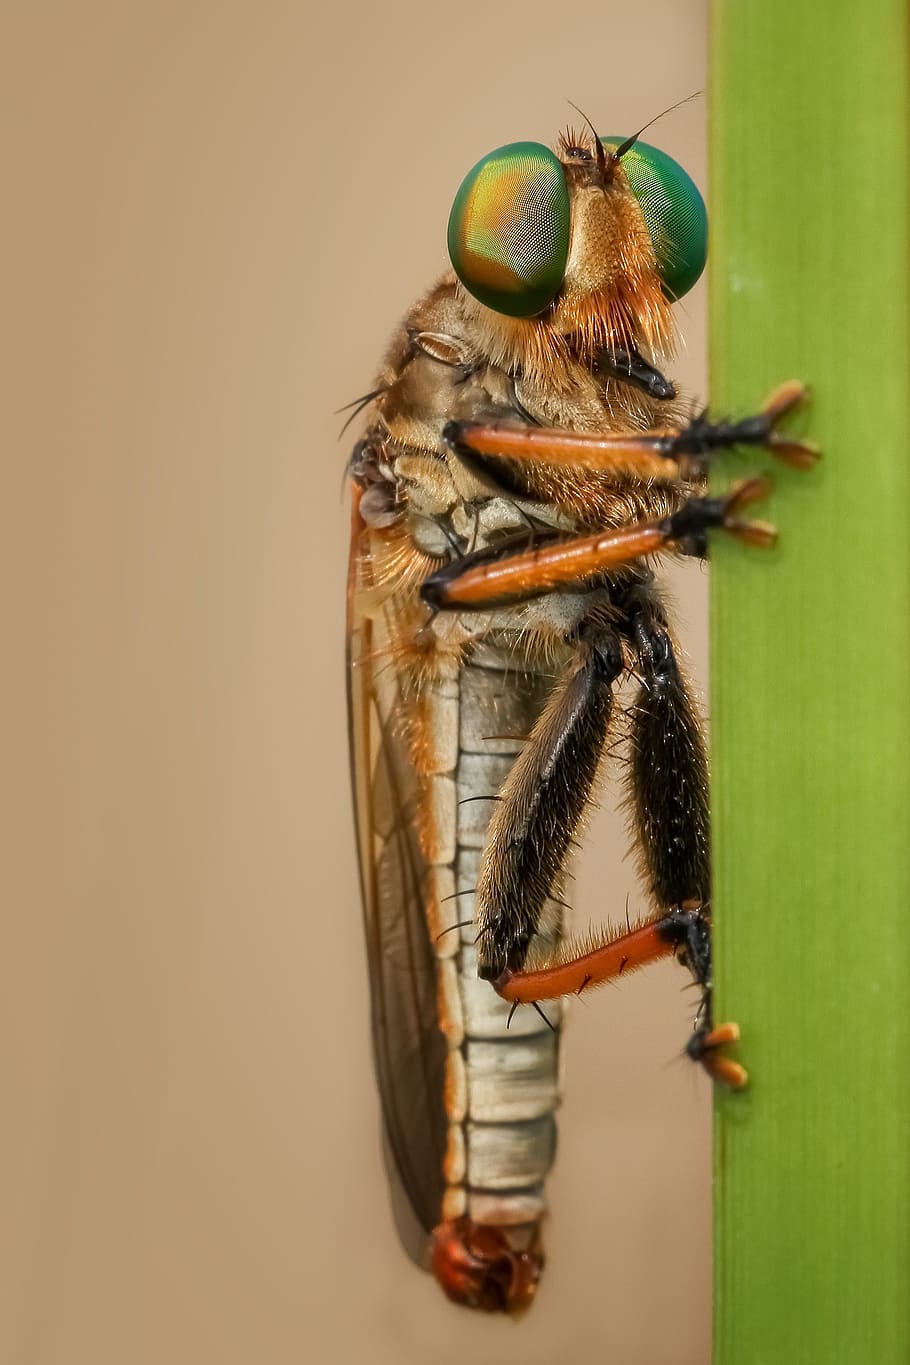 robberfly, insect, macro, nature, green, robber-fly, animal themes, animal wildlife, animal, invertebrate